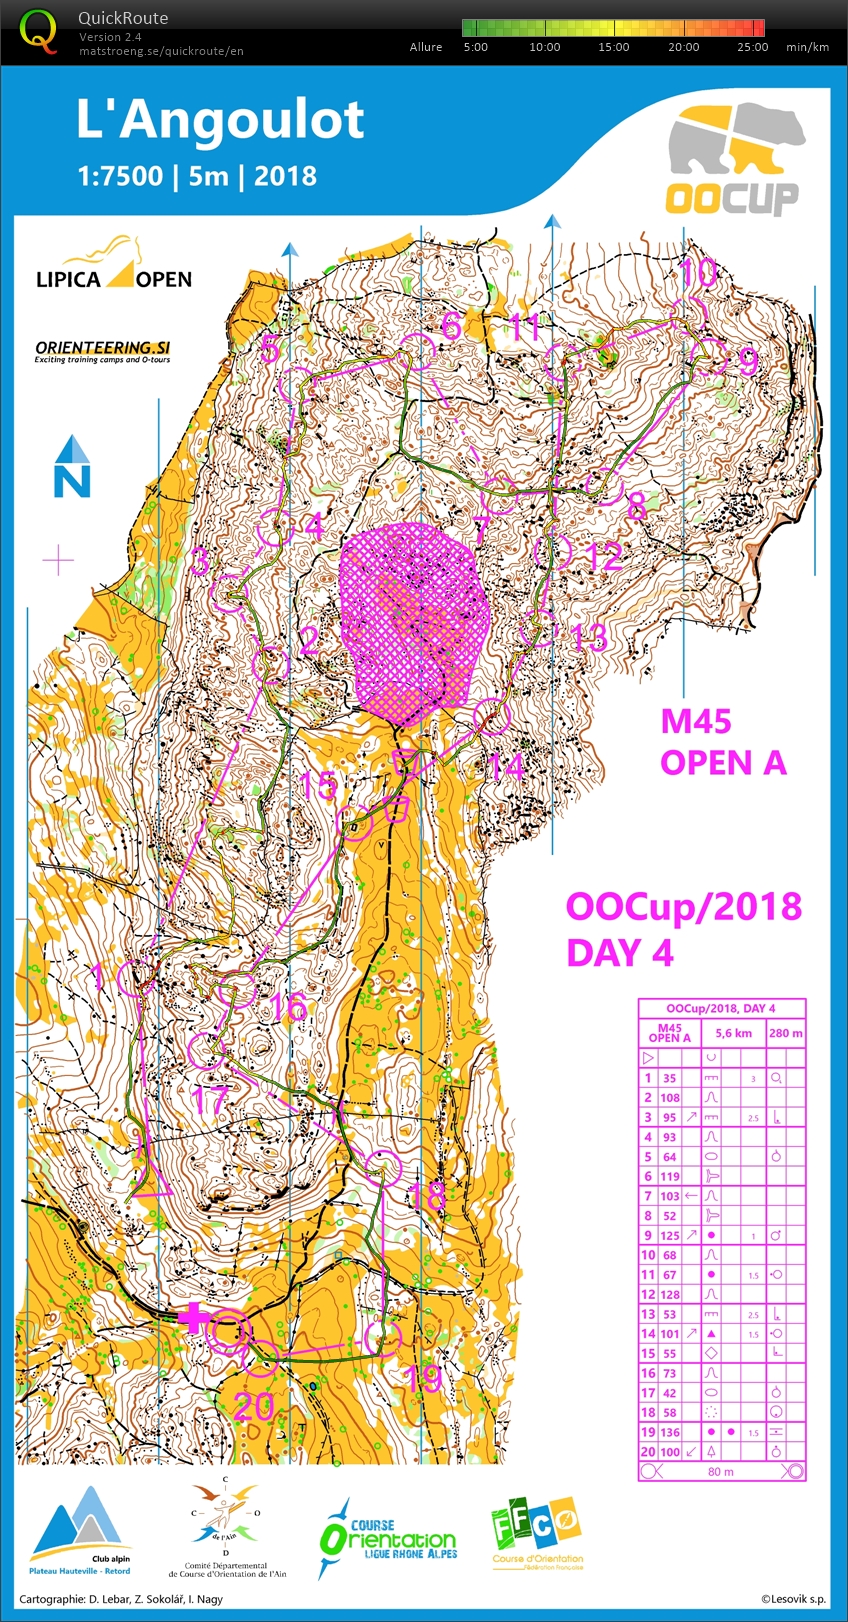 OOCup Day 4 (28.07.2018)